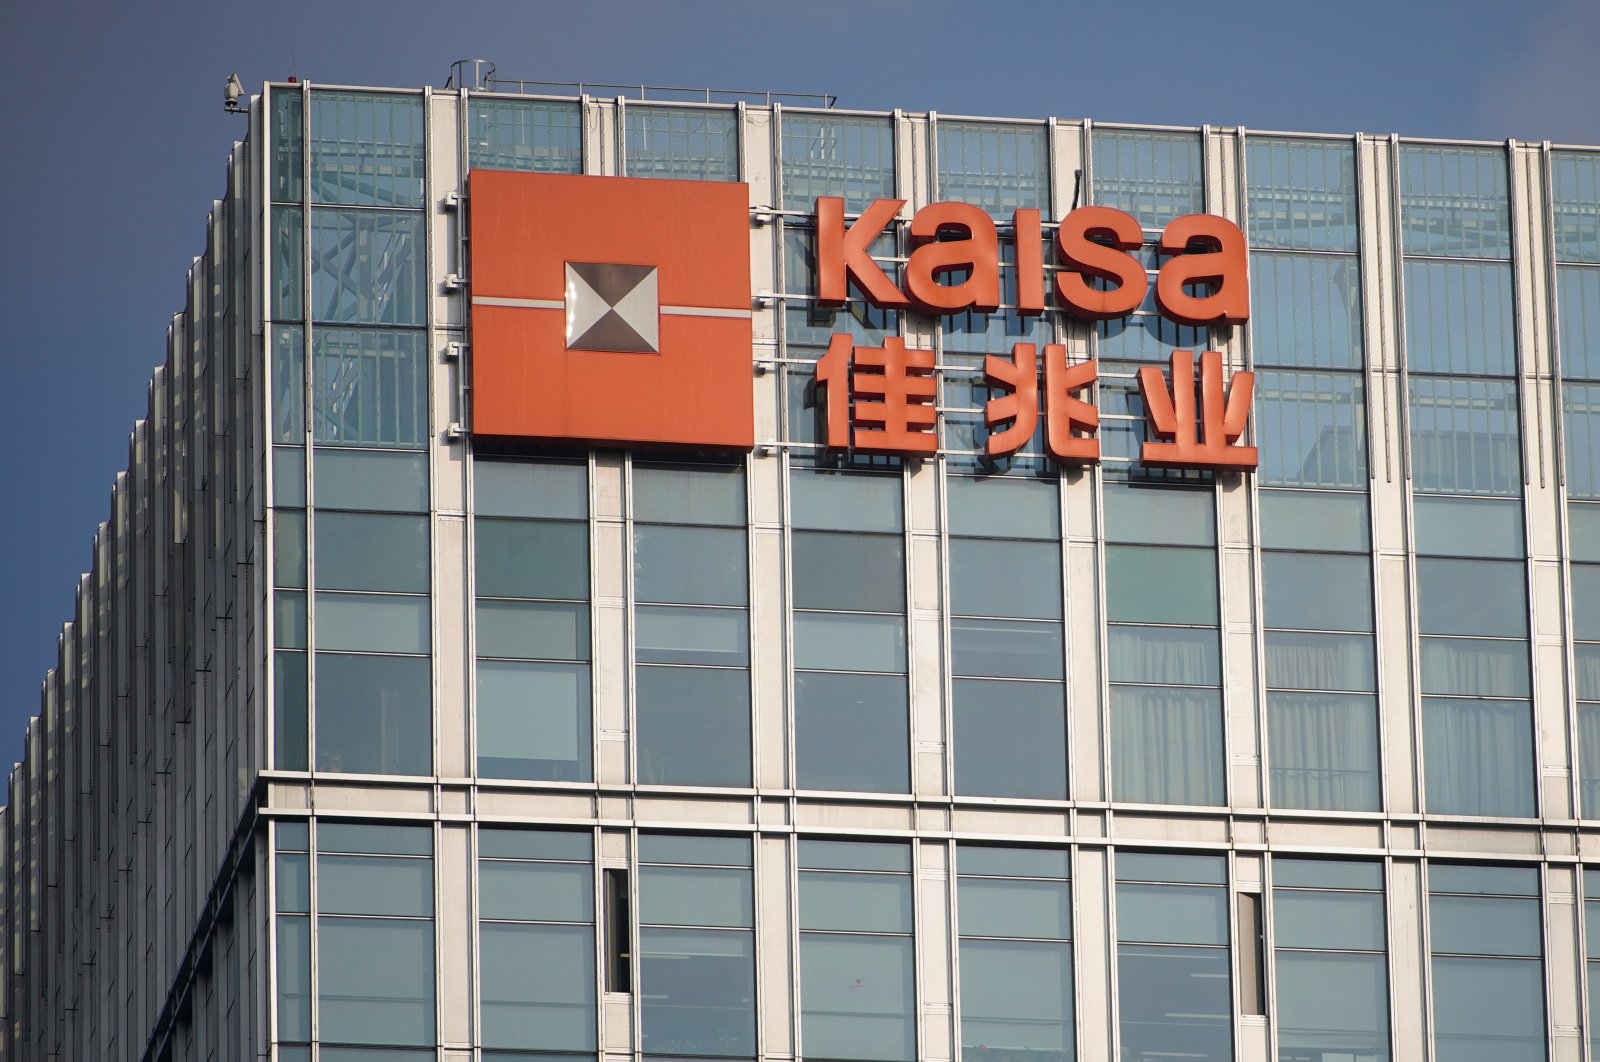 A sign of the Kaisa Holdings Group is seen at the Shanghai Kaisa Financial Centre, in Shanghai, China, Dec. 7, 2021. (Reuters Photo)